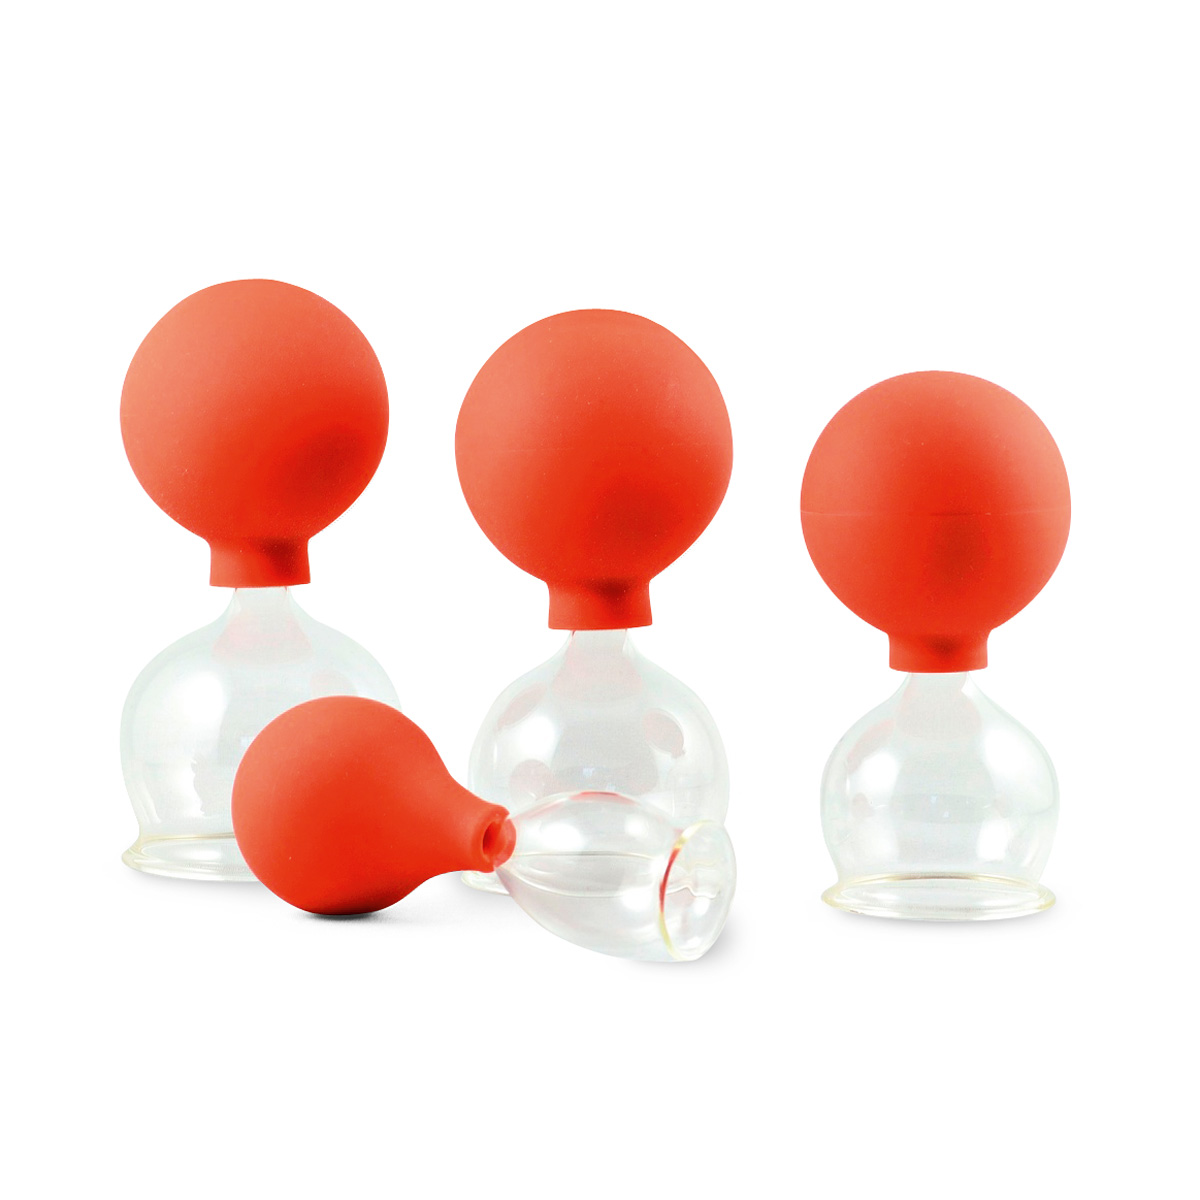 Massage Glass Cupping Set W Suction Bulb 40 60 Mmset Of 3 Pcs 1017757 Cupping Glasses